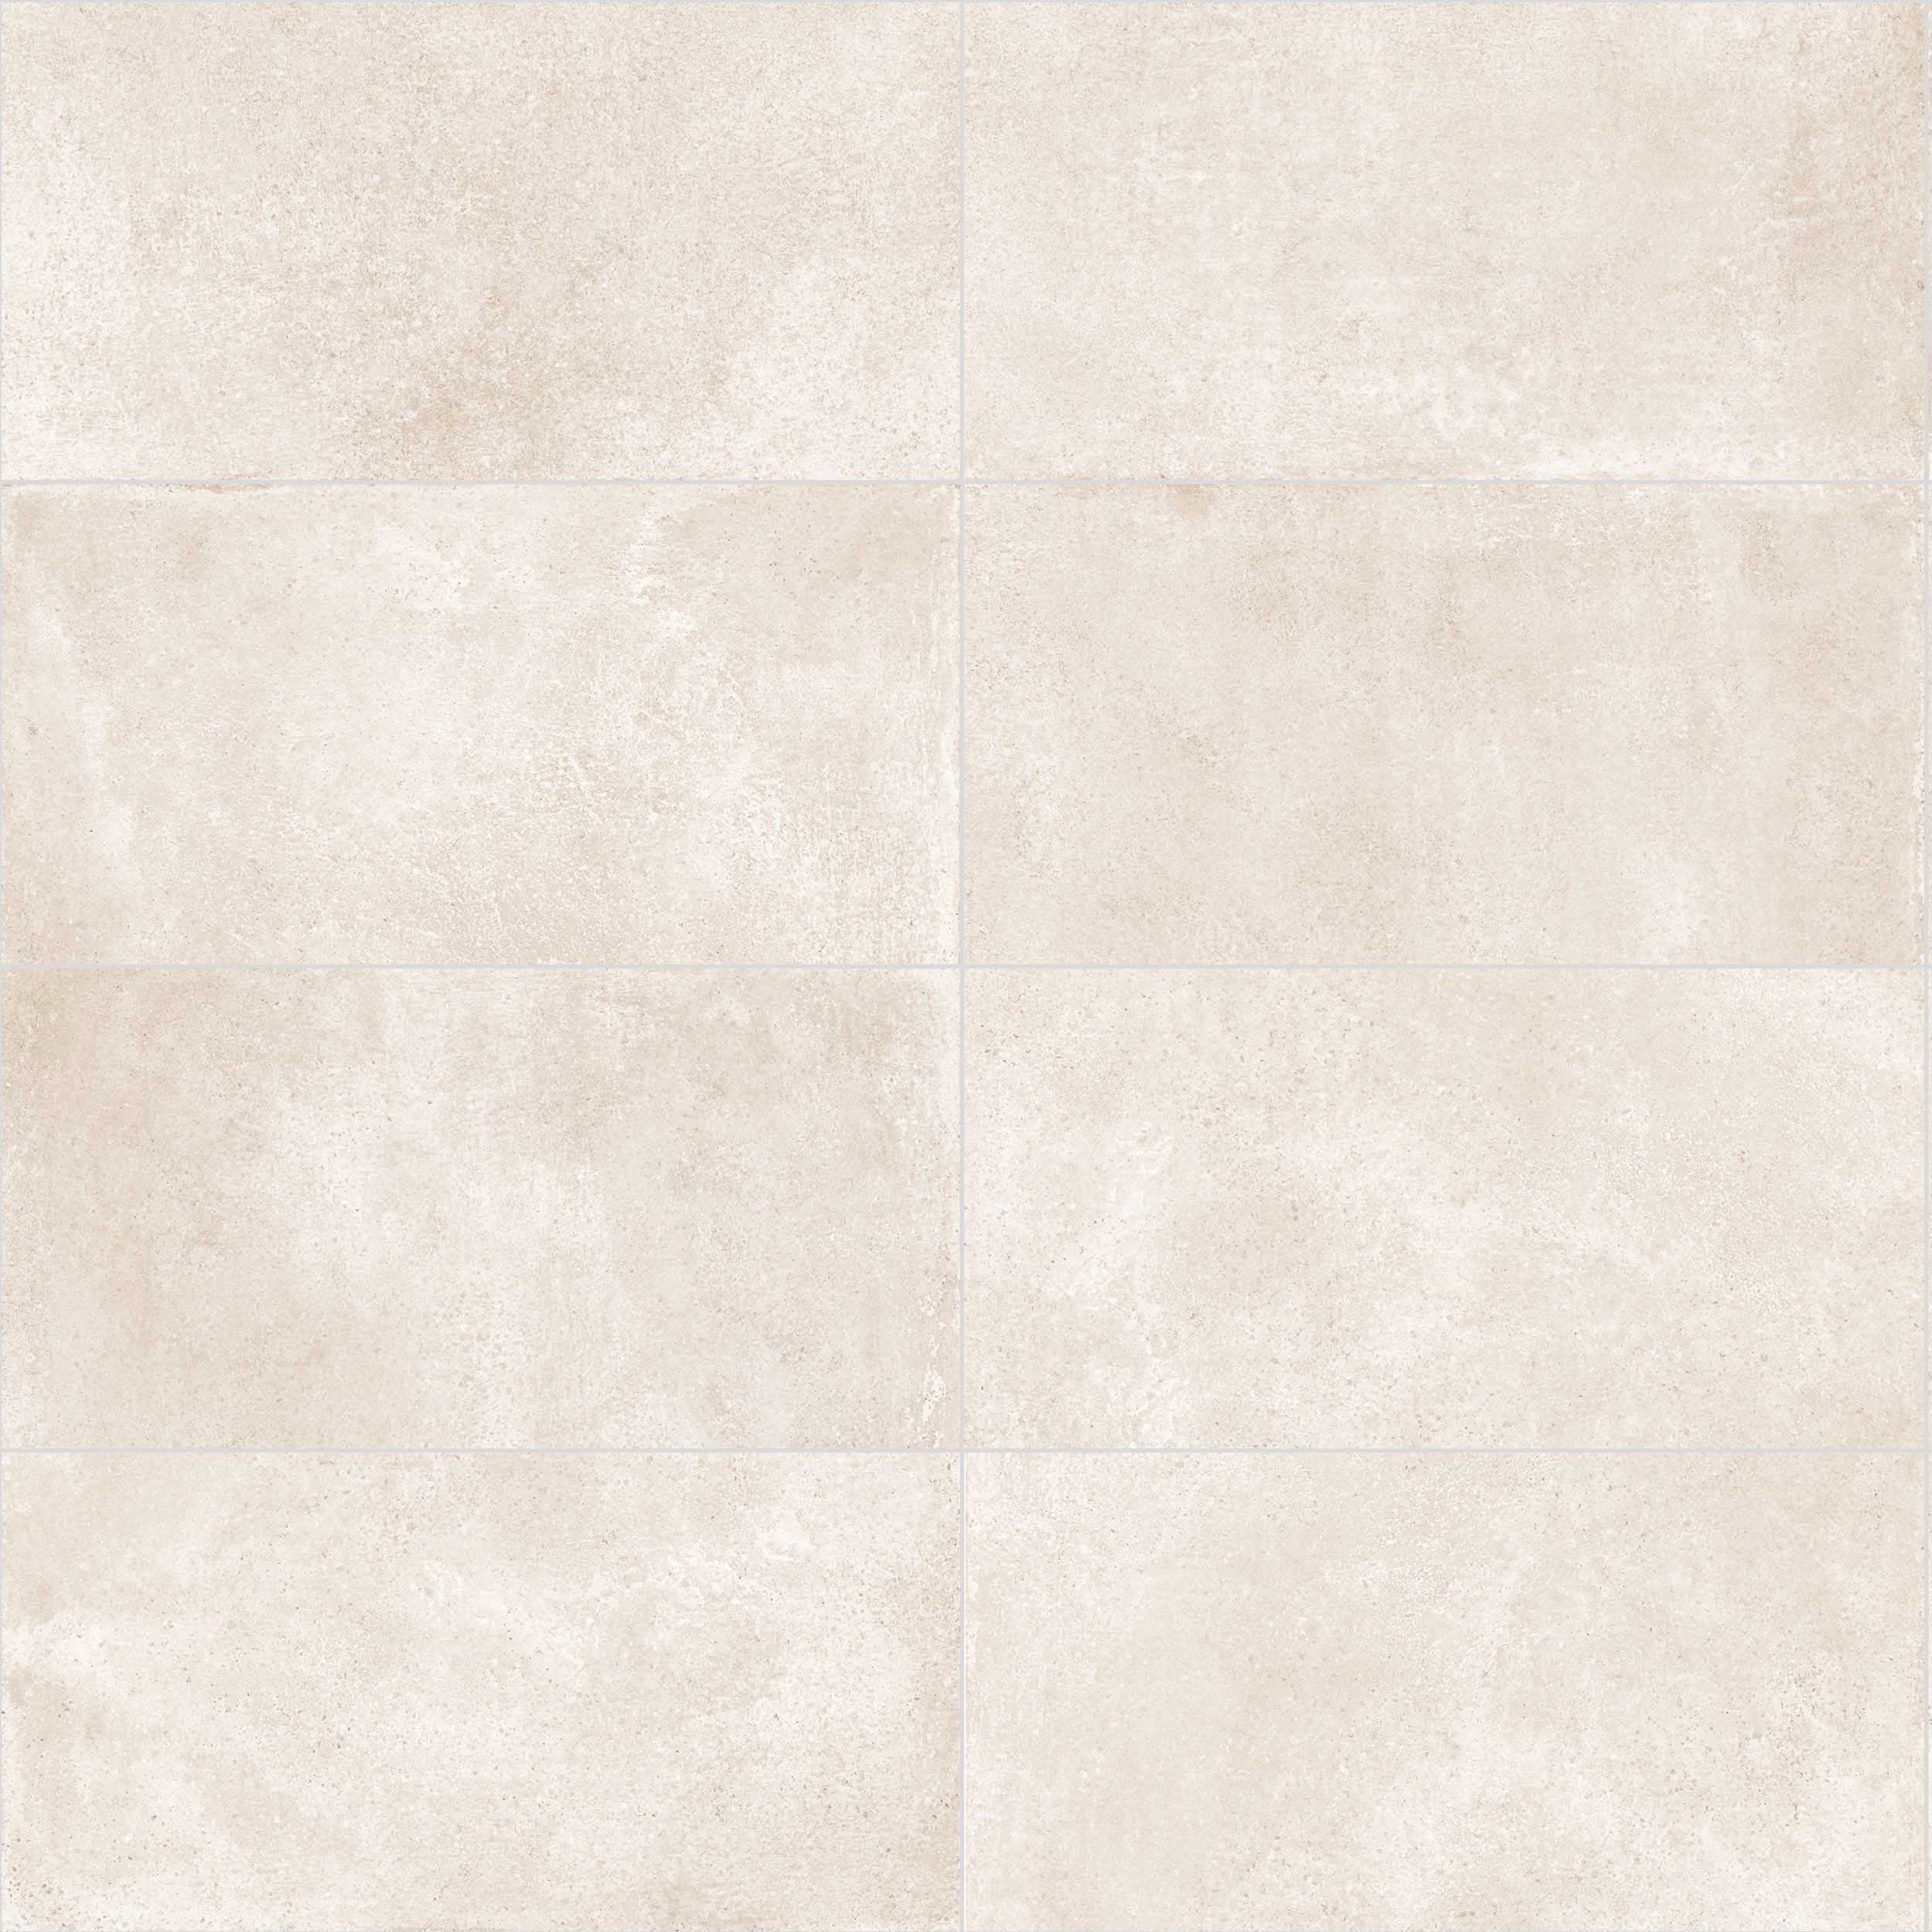 surface group international landmark made in stone heritage beige grip field tile 12x24x9 mm for outdoor application manufactured by landmark